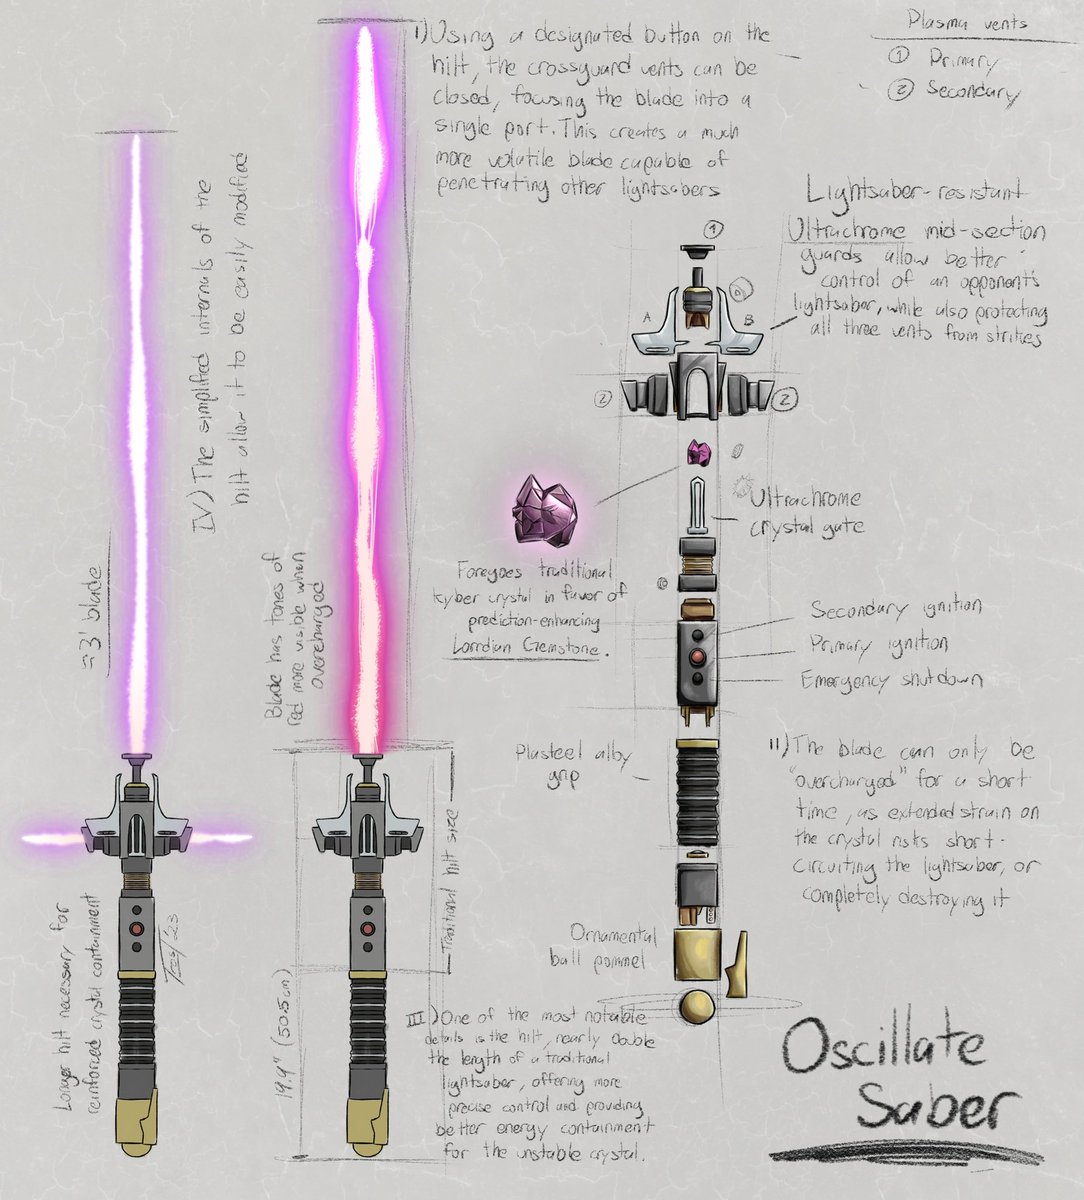 I took a complete left turn and decided to design a lightsaber (I know nothing about lightsabers and just watch the movies)